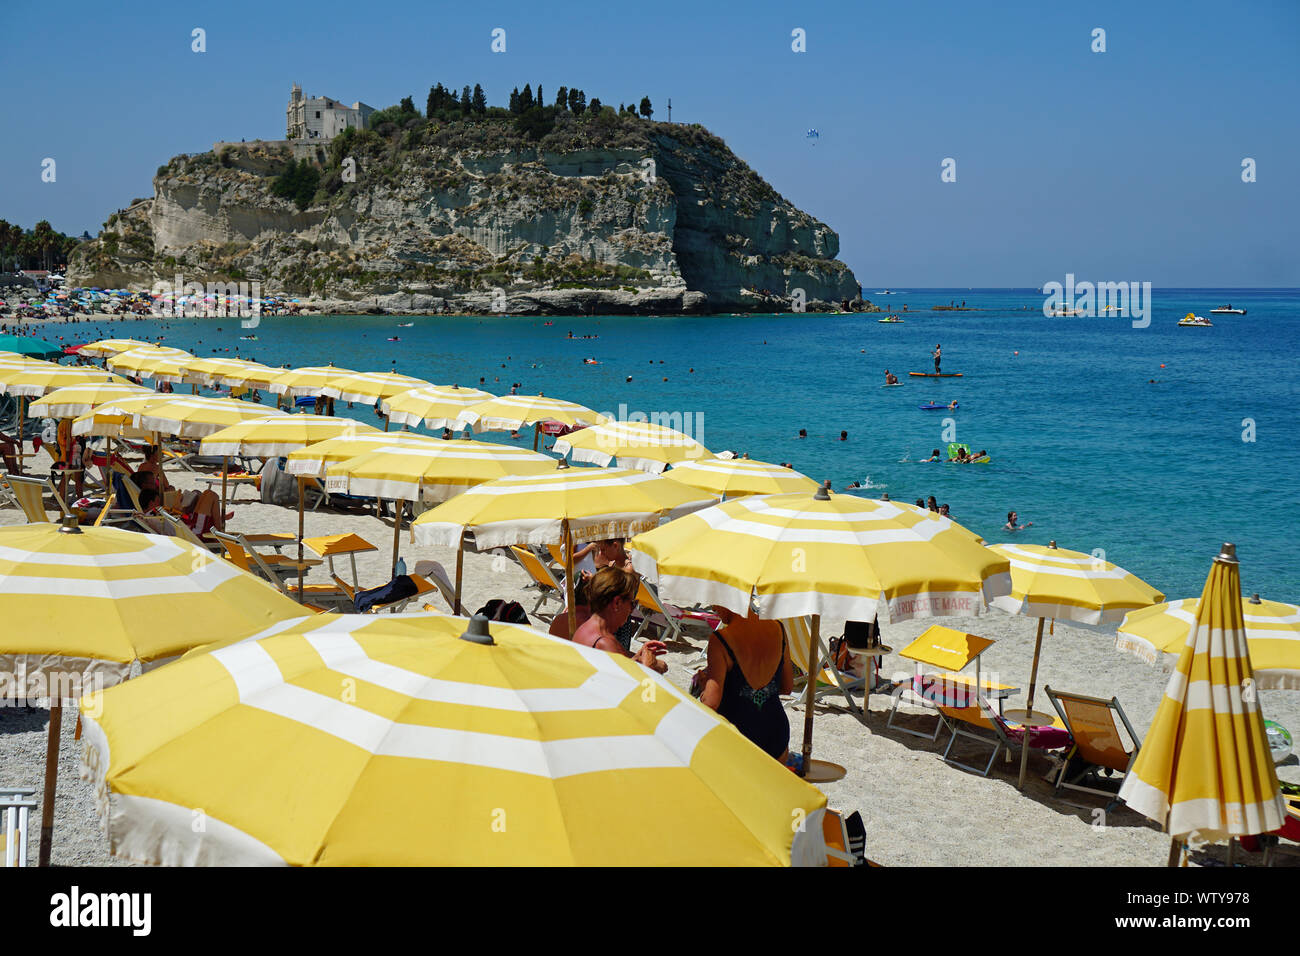 The public beach in Tropea, Calabria, Italy. View from the south August 2019. On the hill at the back is built the Church of Santa Maria dell'Isola. Stock Photo